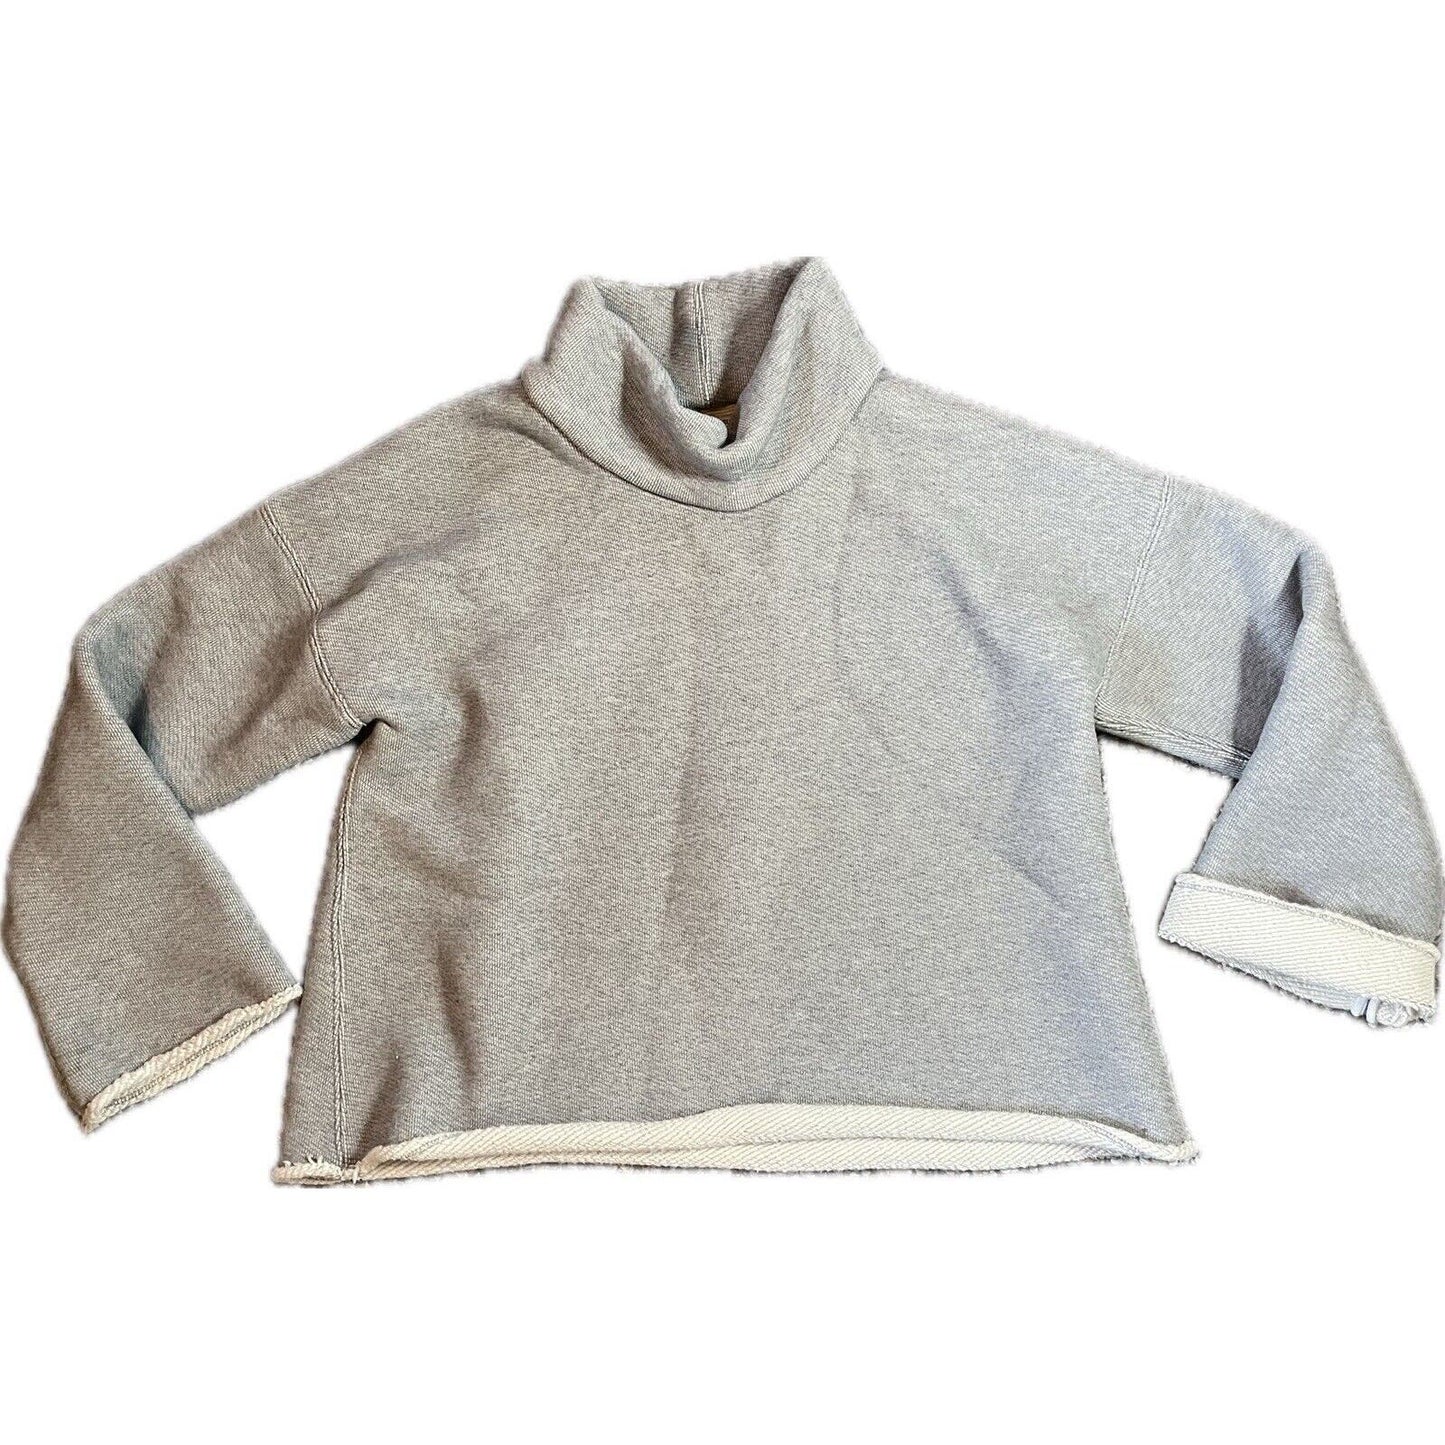 MM LaFleur Sharon Cowl Sweater Size Large Long Sleeve Gray with White Lining